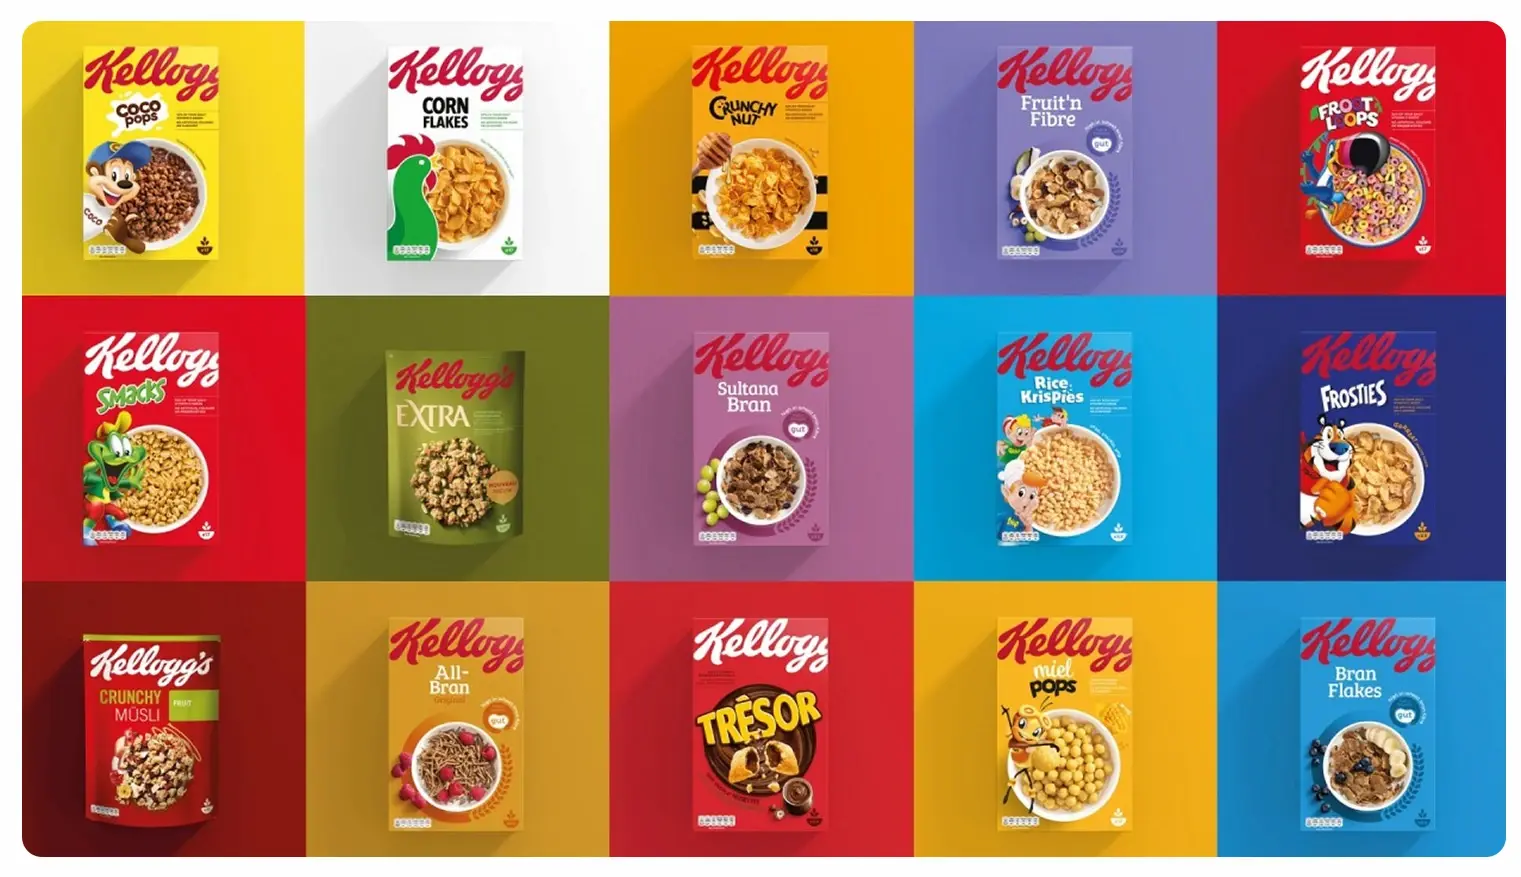 Kellogg rebranded cereal products boxes in different color palettes